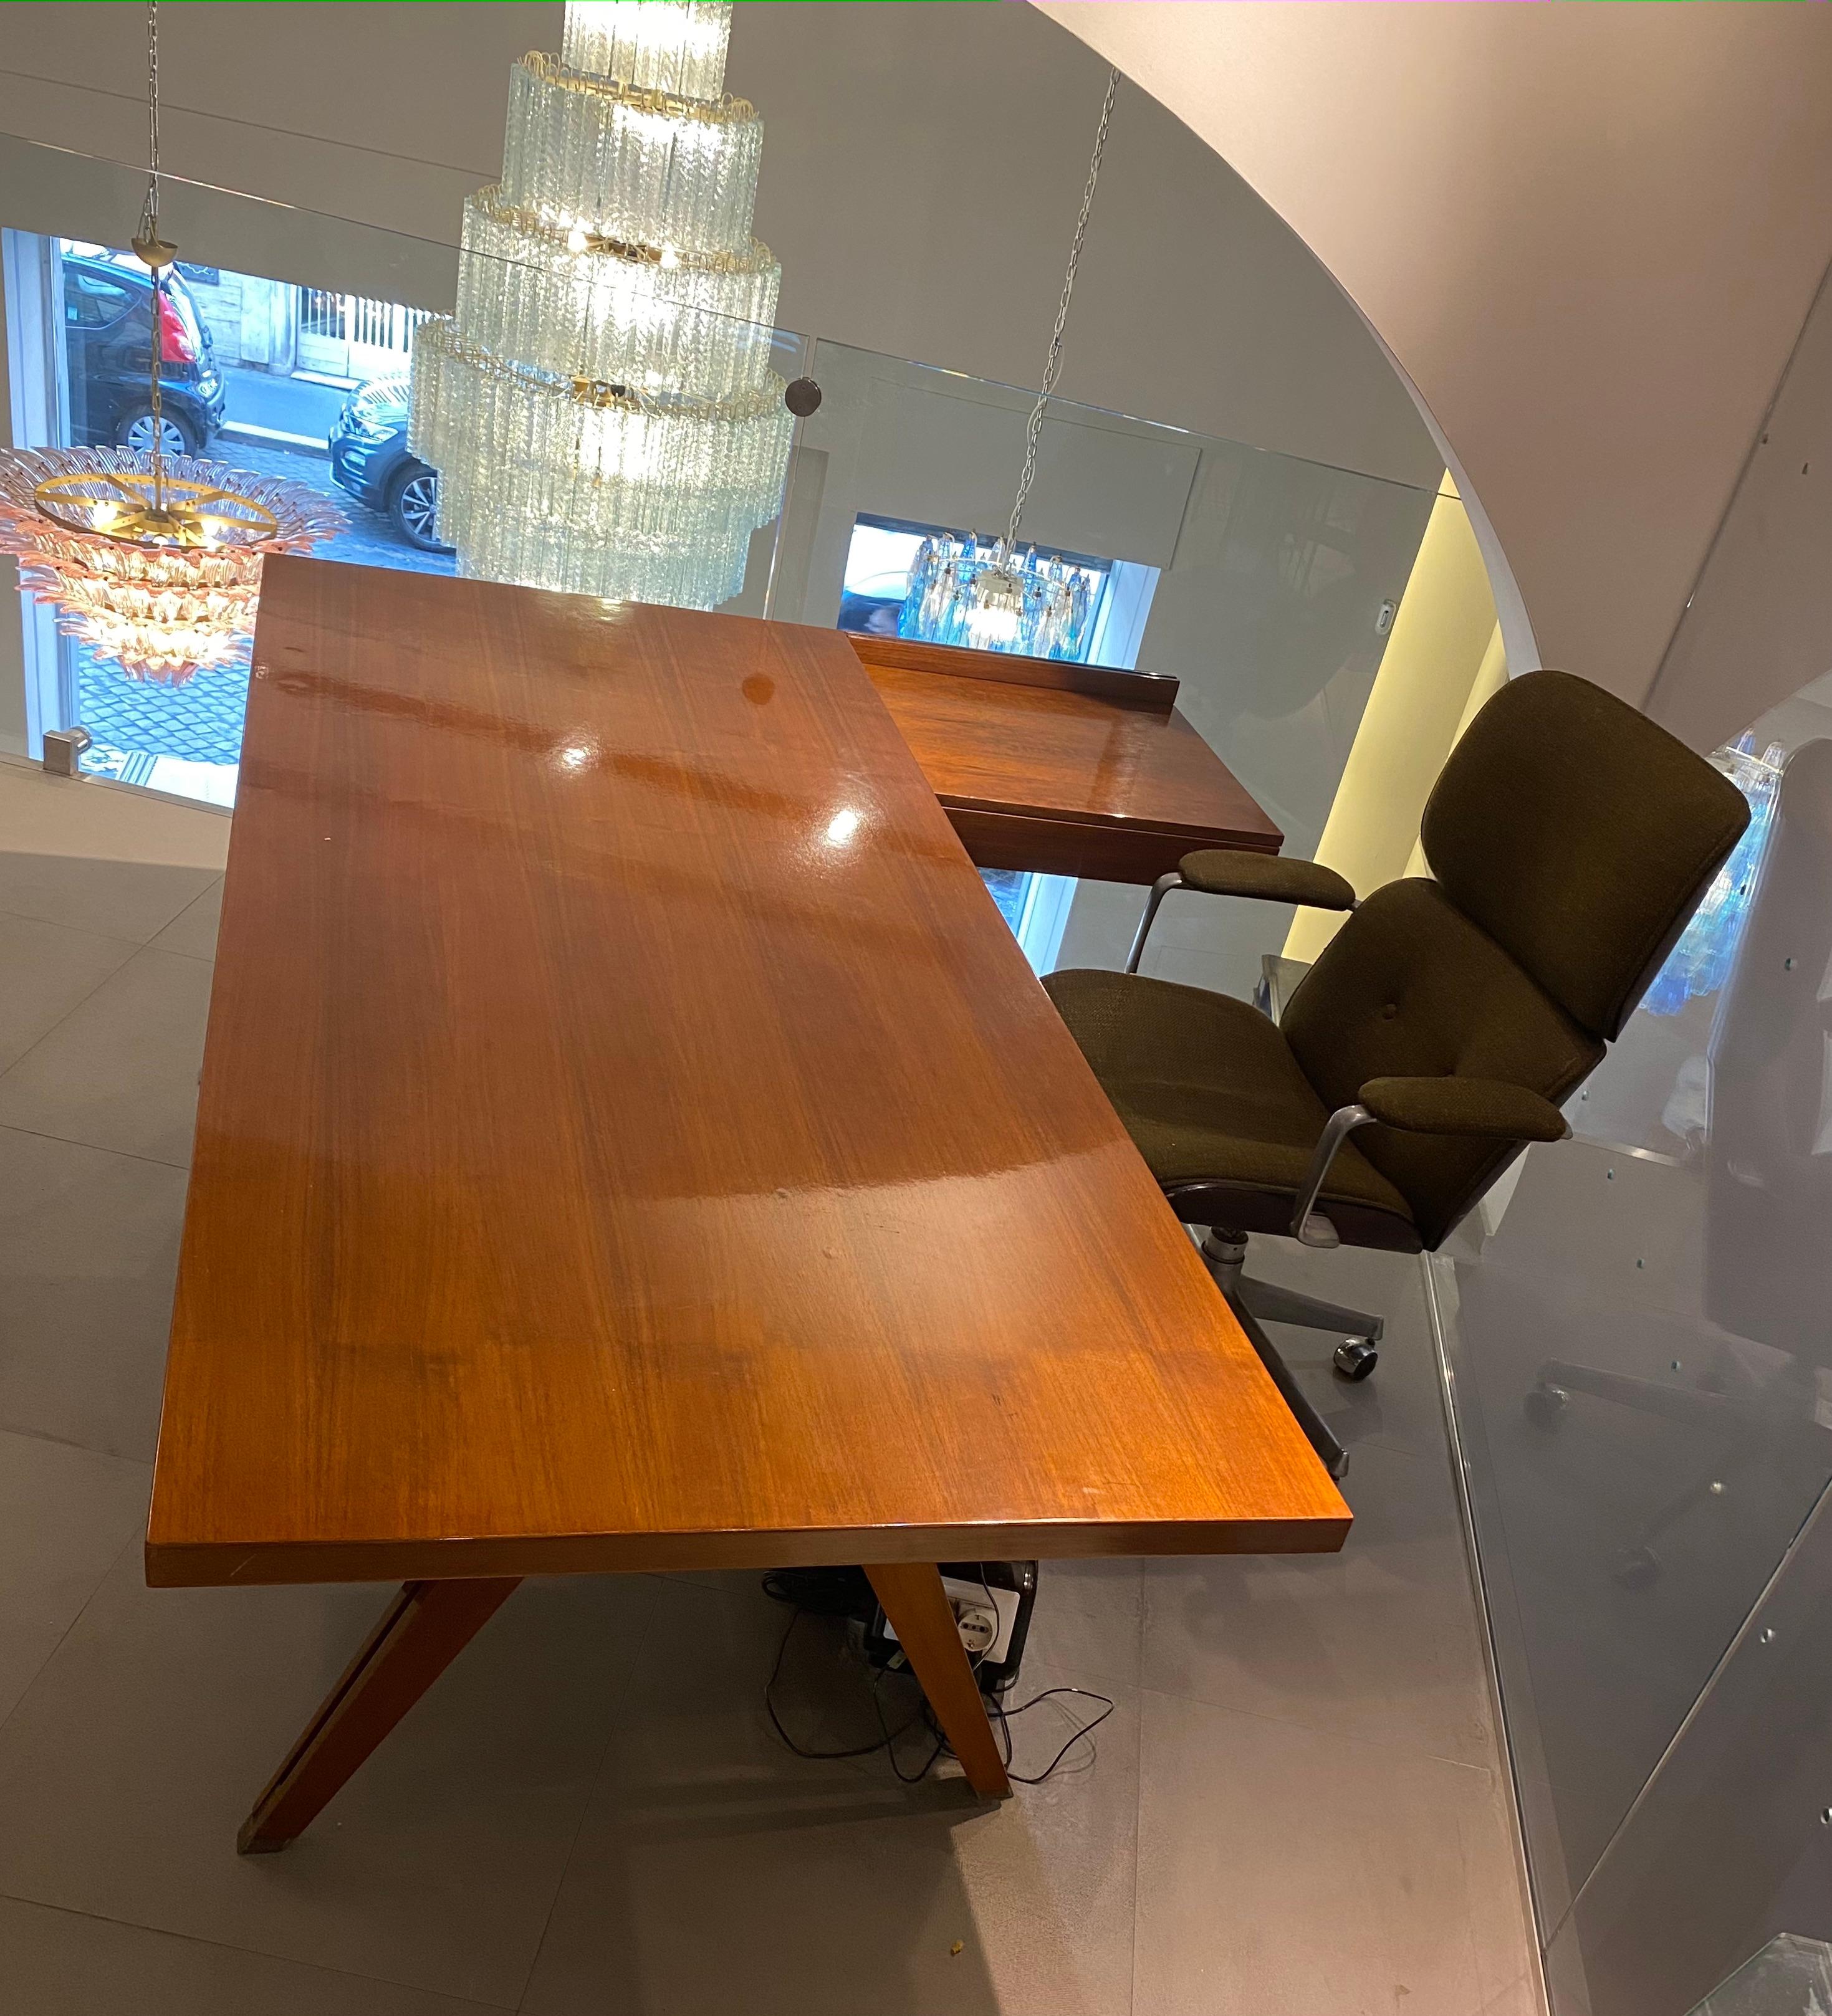 This large Terni executive desk was designed by Ico Parisi in 1958 for MIM (Mobili Italiani Moderni) Rome, Italy, with a rectangular tabletop, The desk contains a three drawer block on one side and a two drawer block on the back. That way the desk